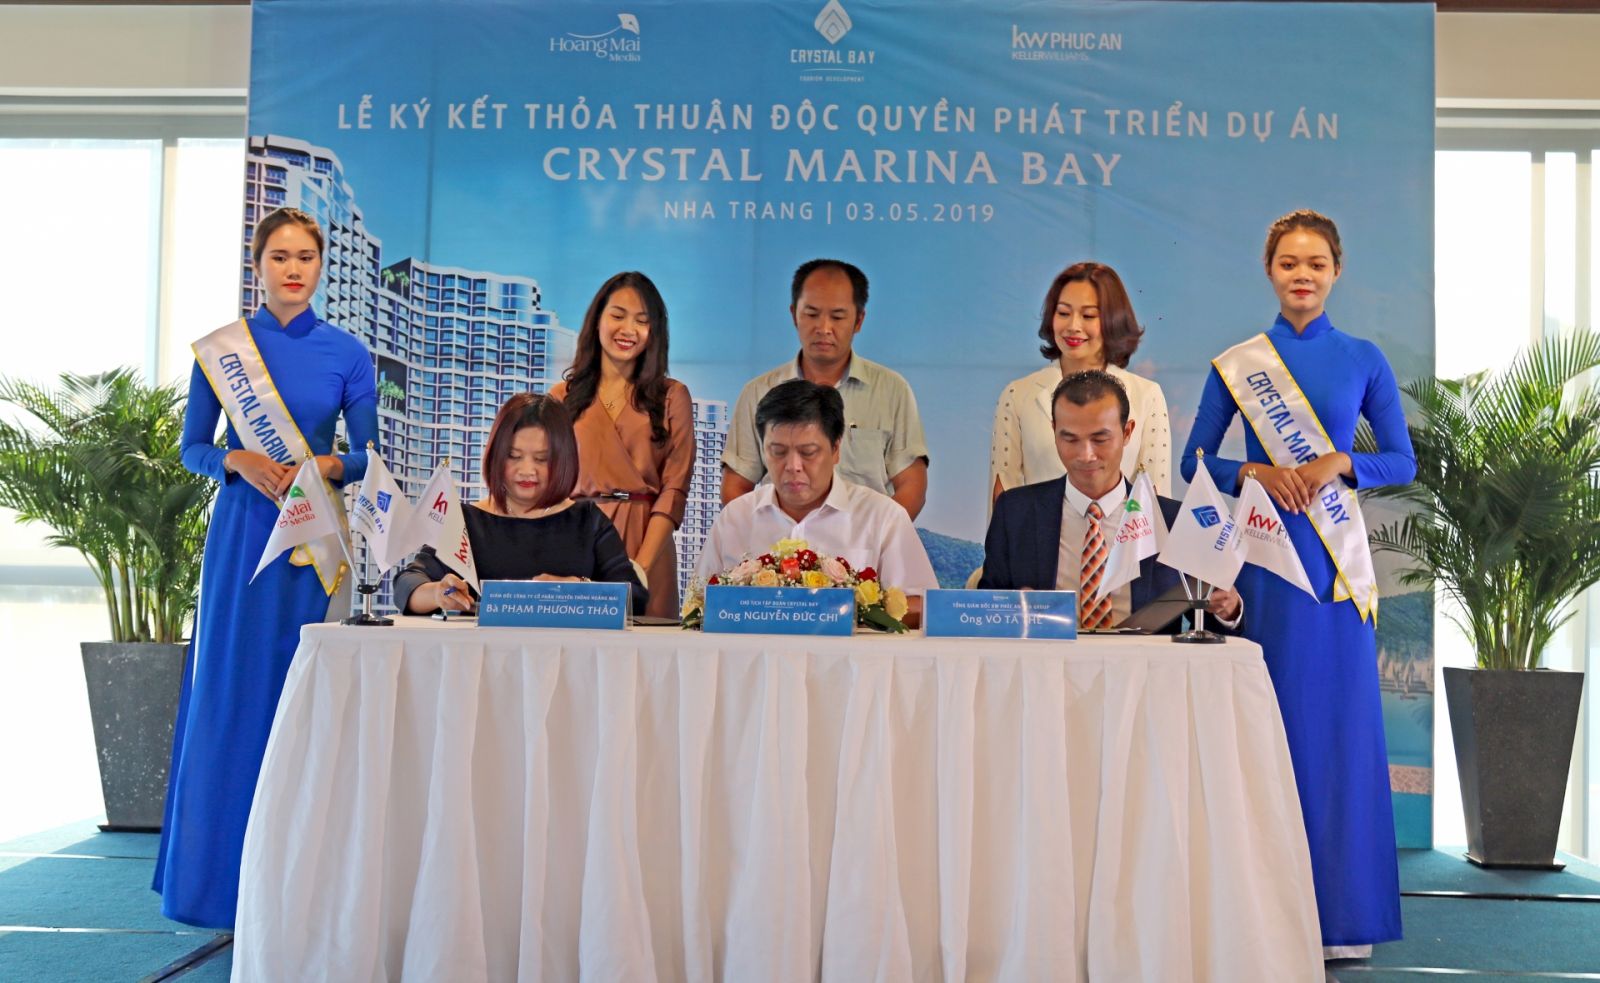 Crystal Marina Bay is a new crystal that attracts tourists and investors.